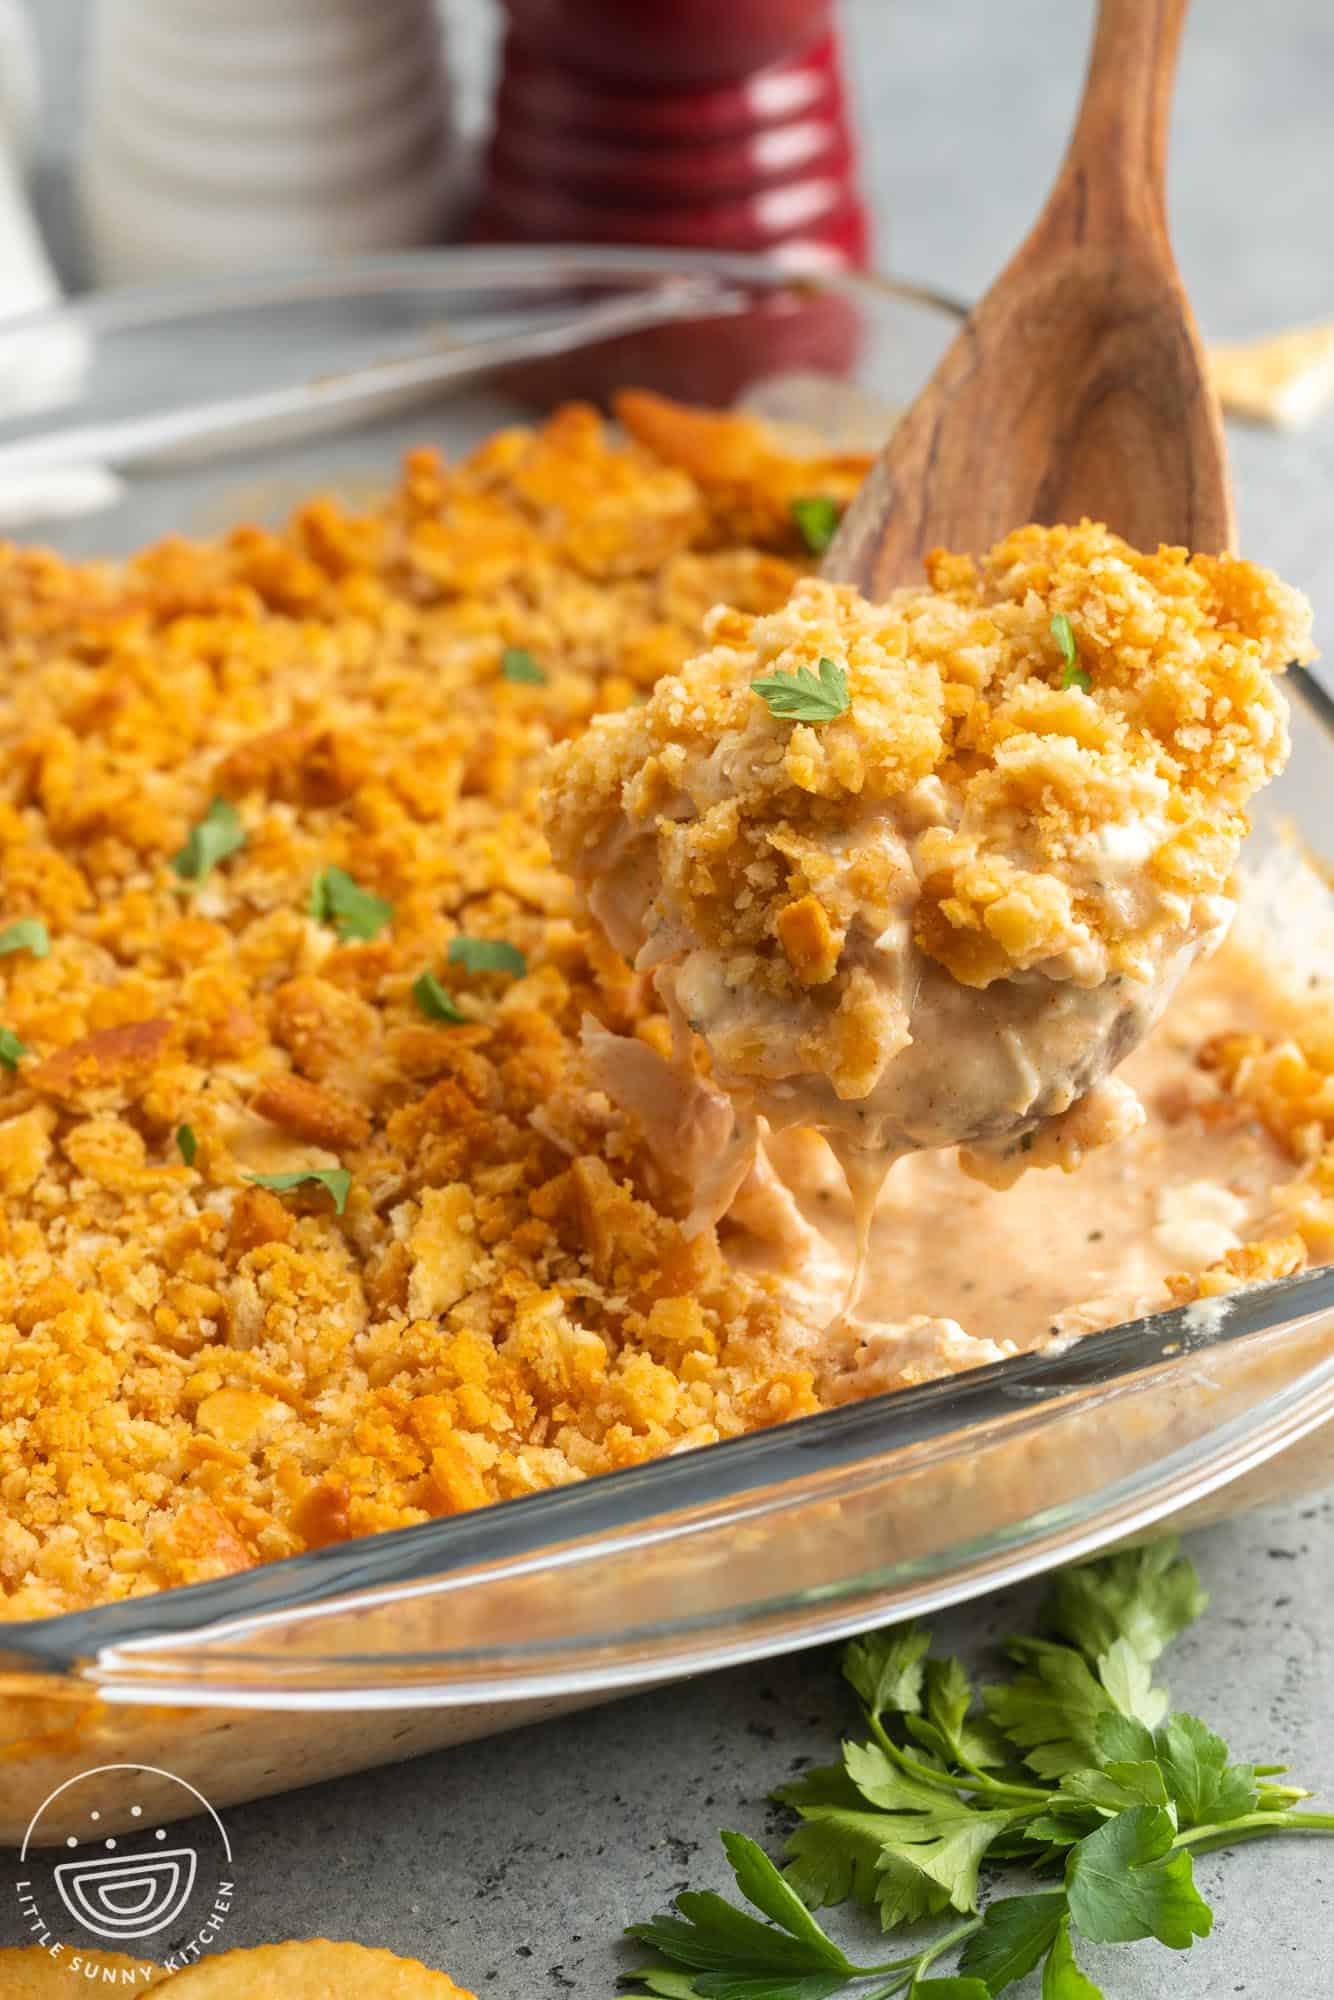 million dollar chicken casserole with crispy cracker topping, served with a wooden spoon.